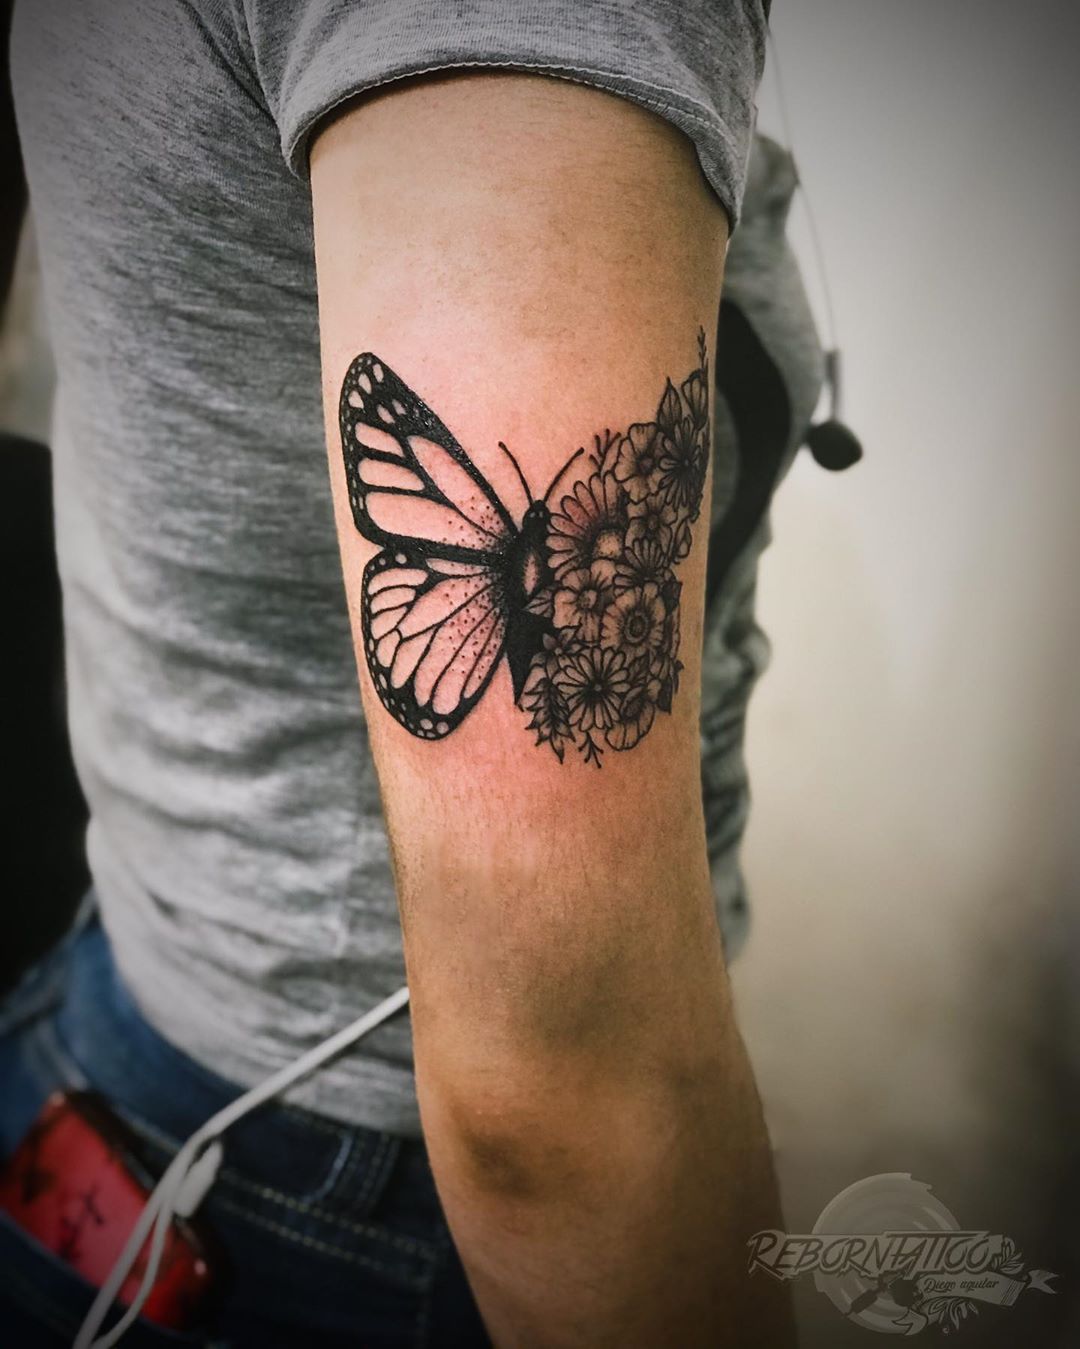 medium-sized black and grey tattoo on woman's upper arm of butterfly with one floral wing